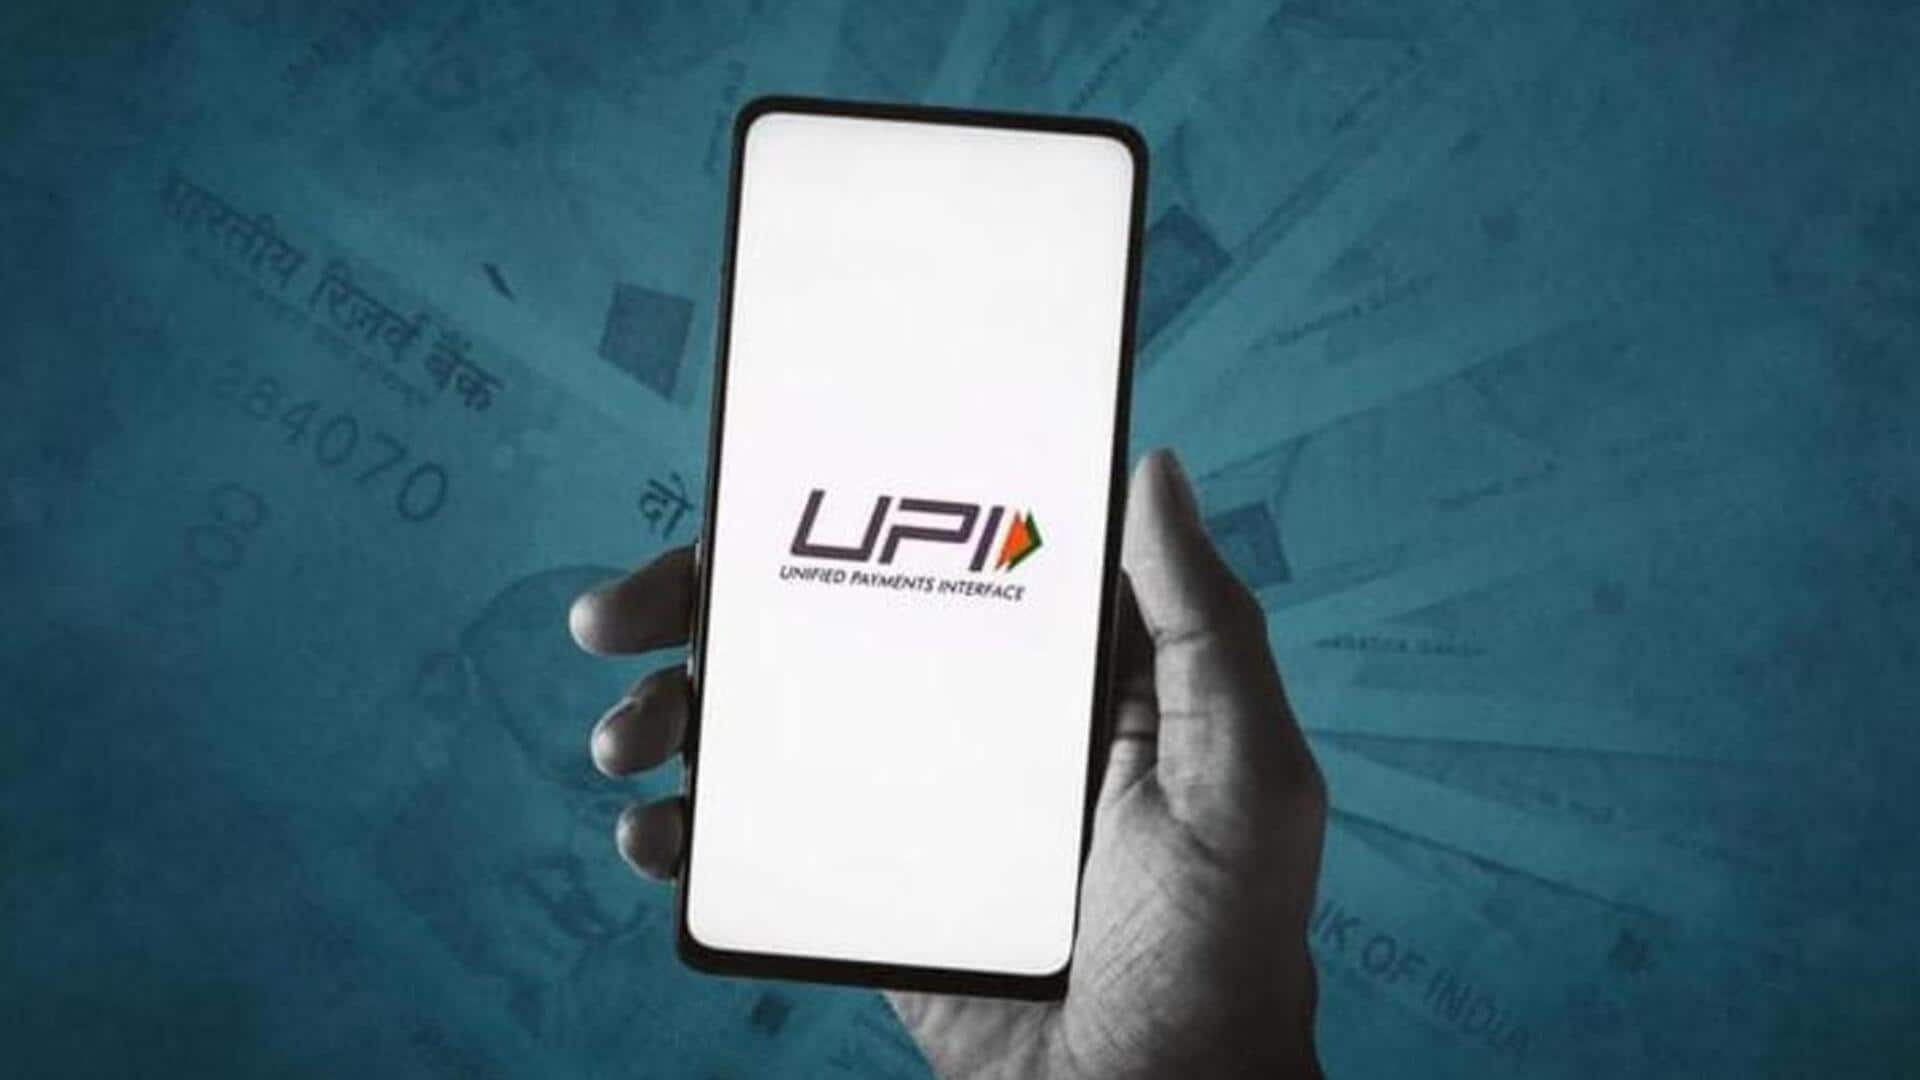 India's UPI may soon launch in South American, African countries